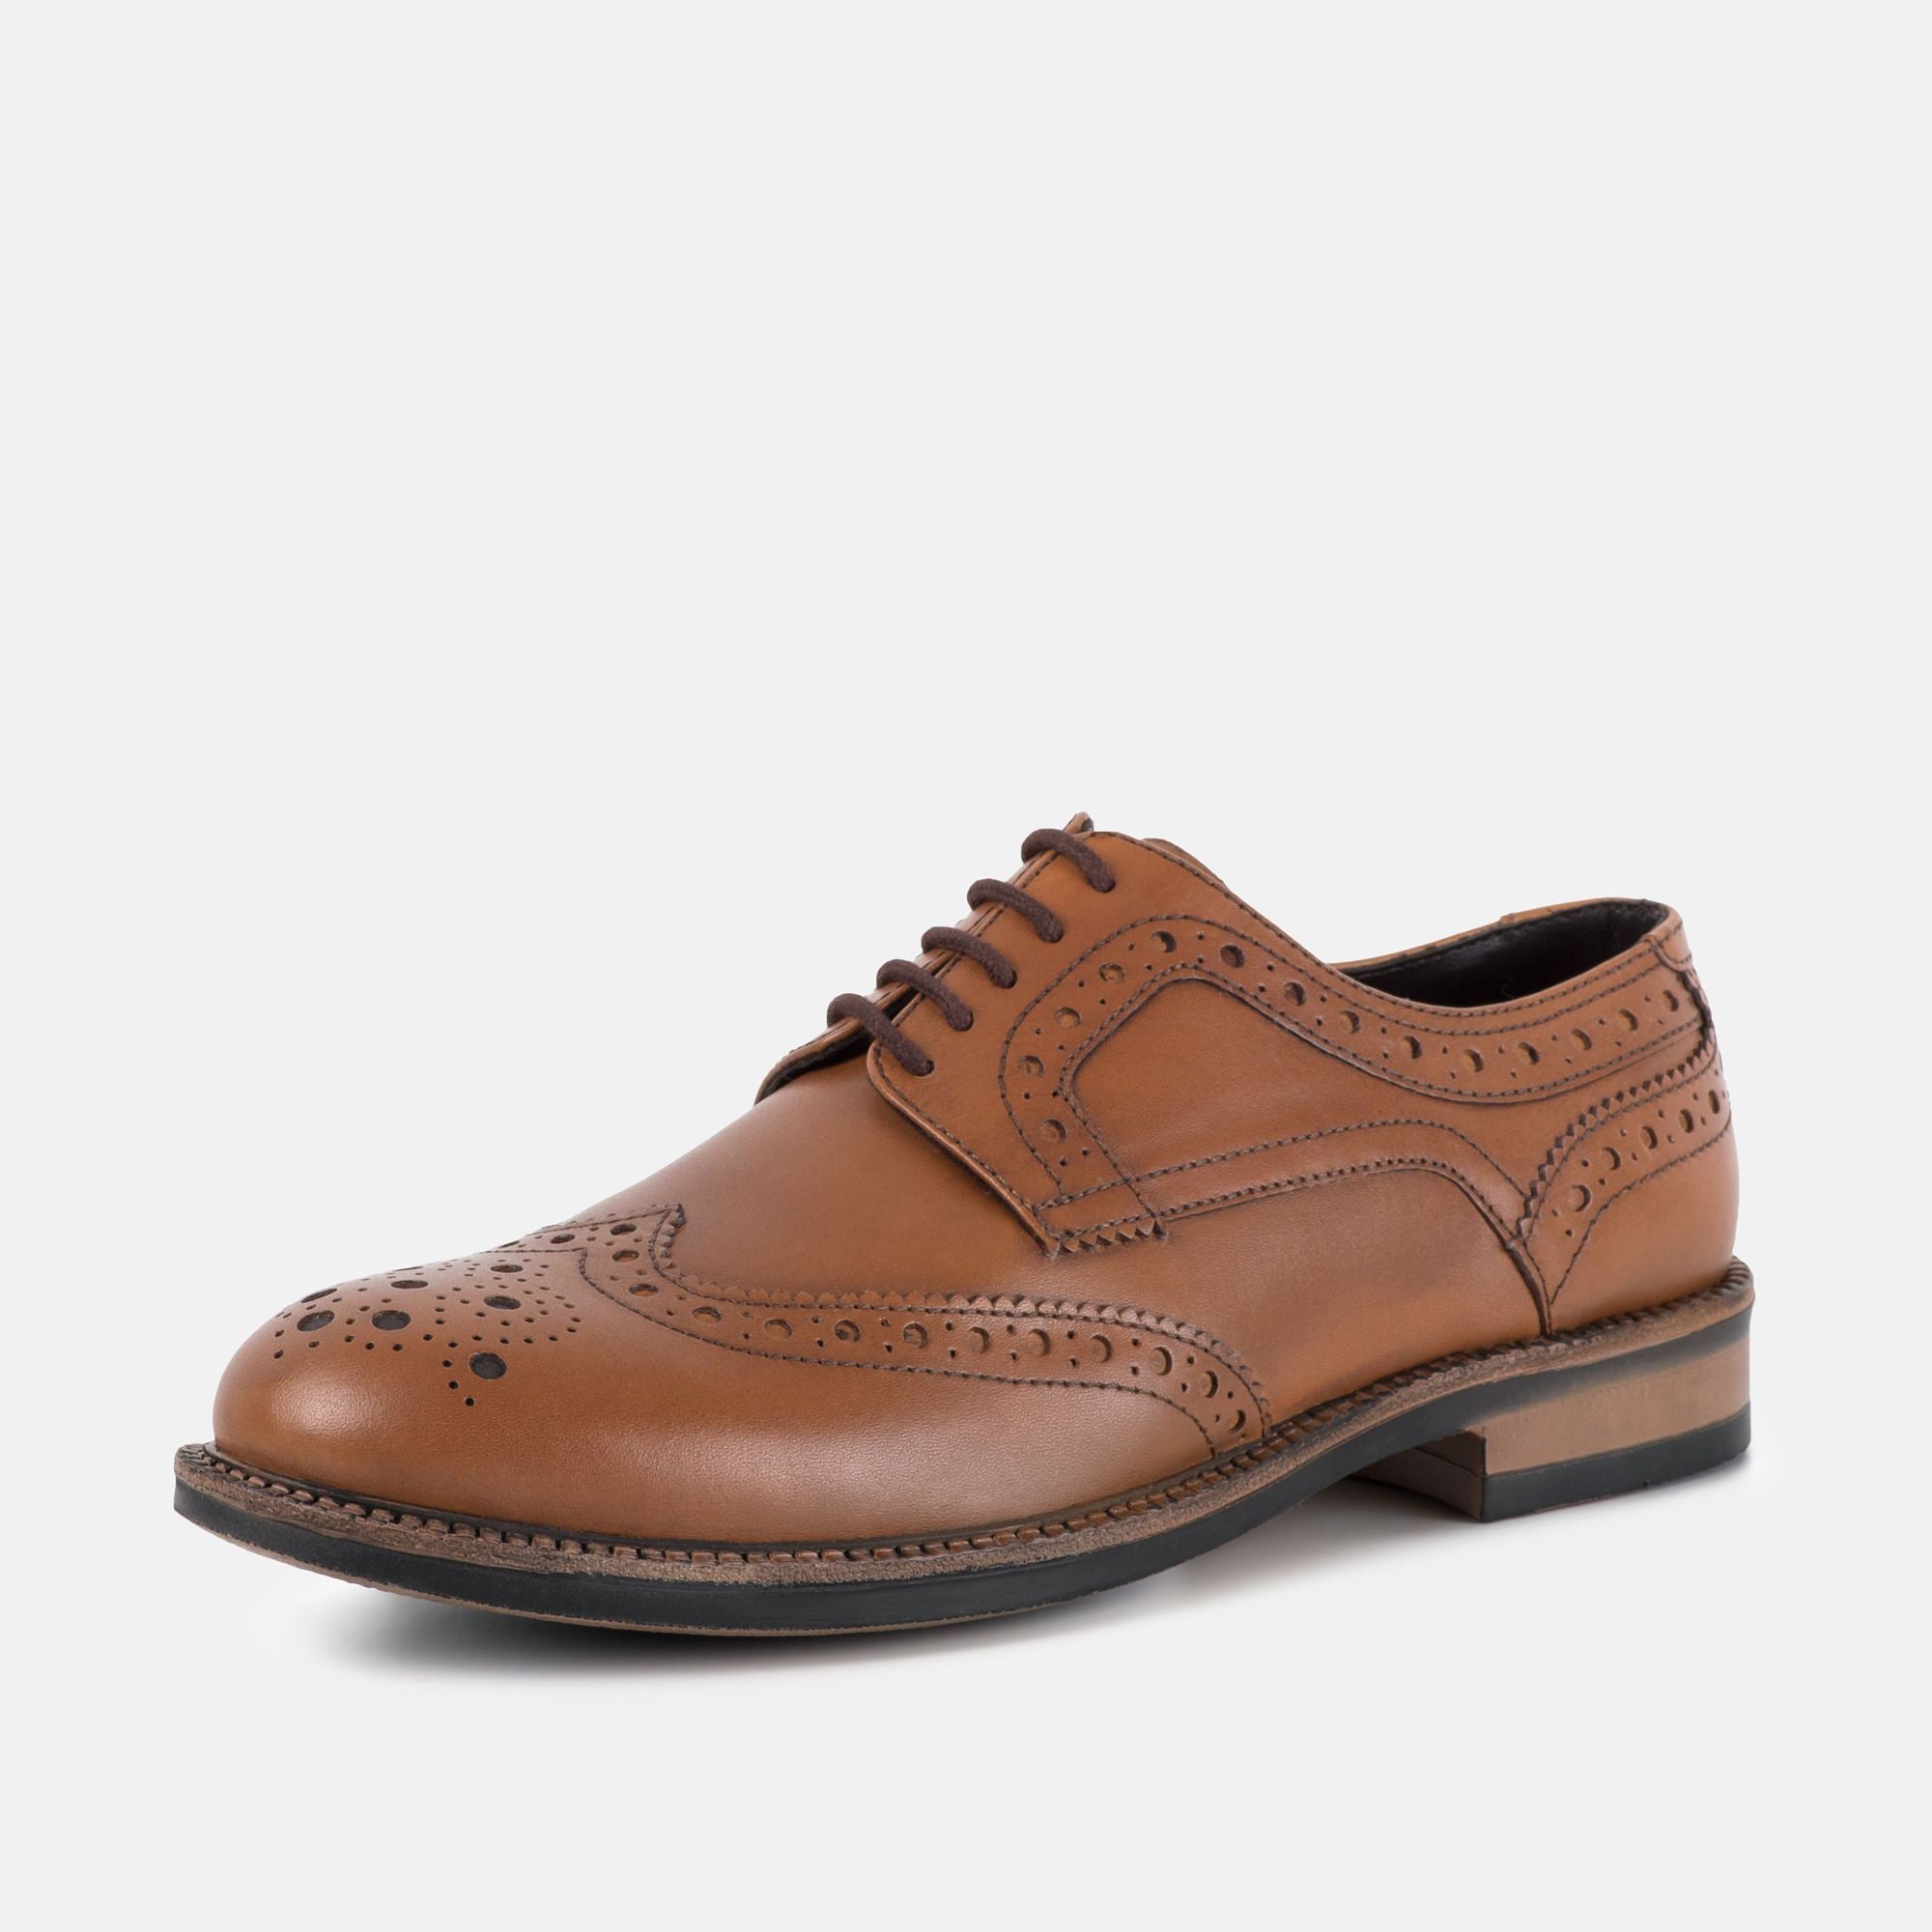 JOHNSON TAN - MEN'S DERBY BROGUE | Redfoot – Redfoot Shoes